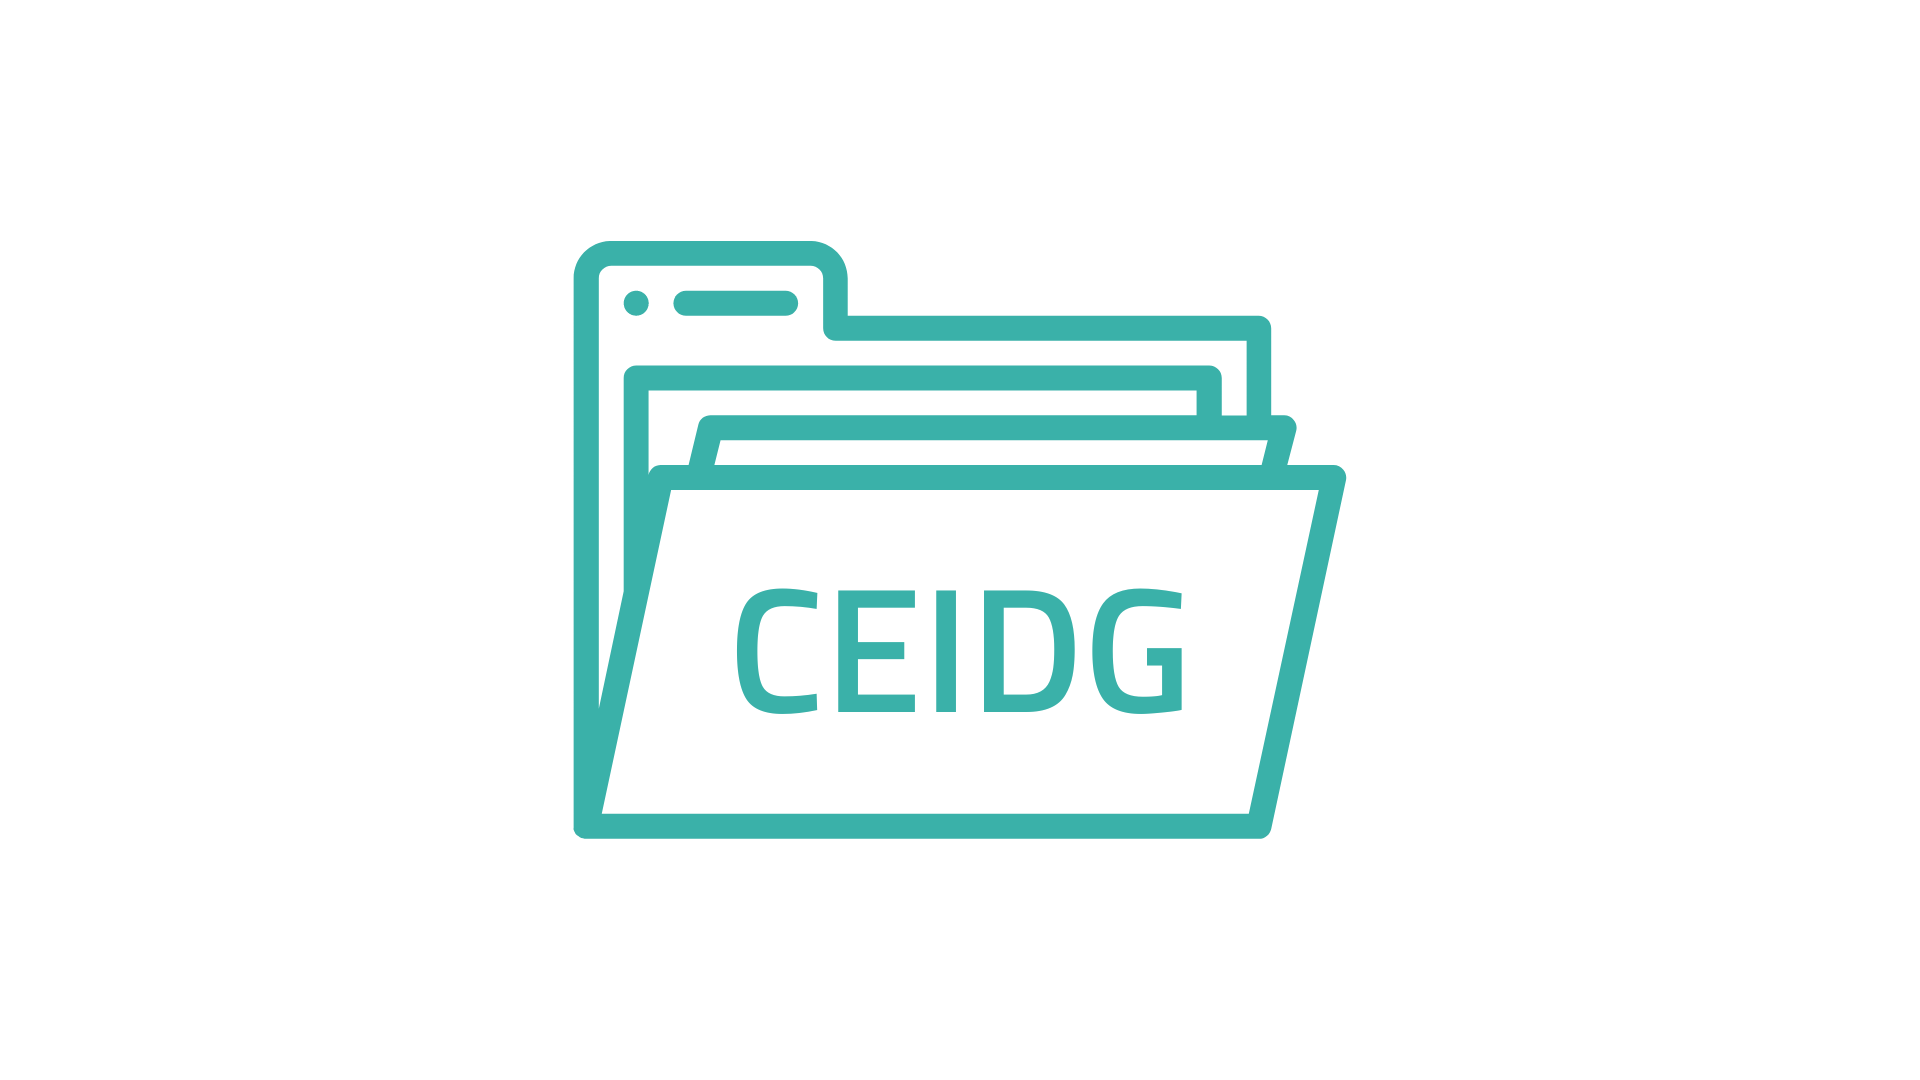 CEIDG – what is it and what is it for?